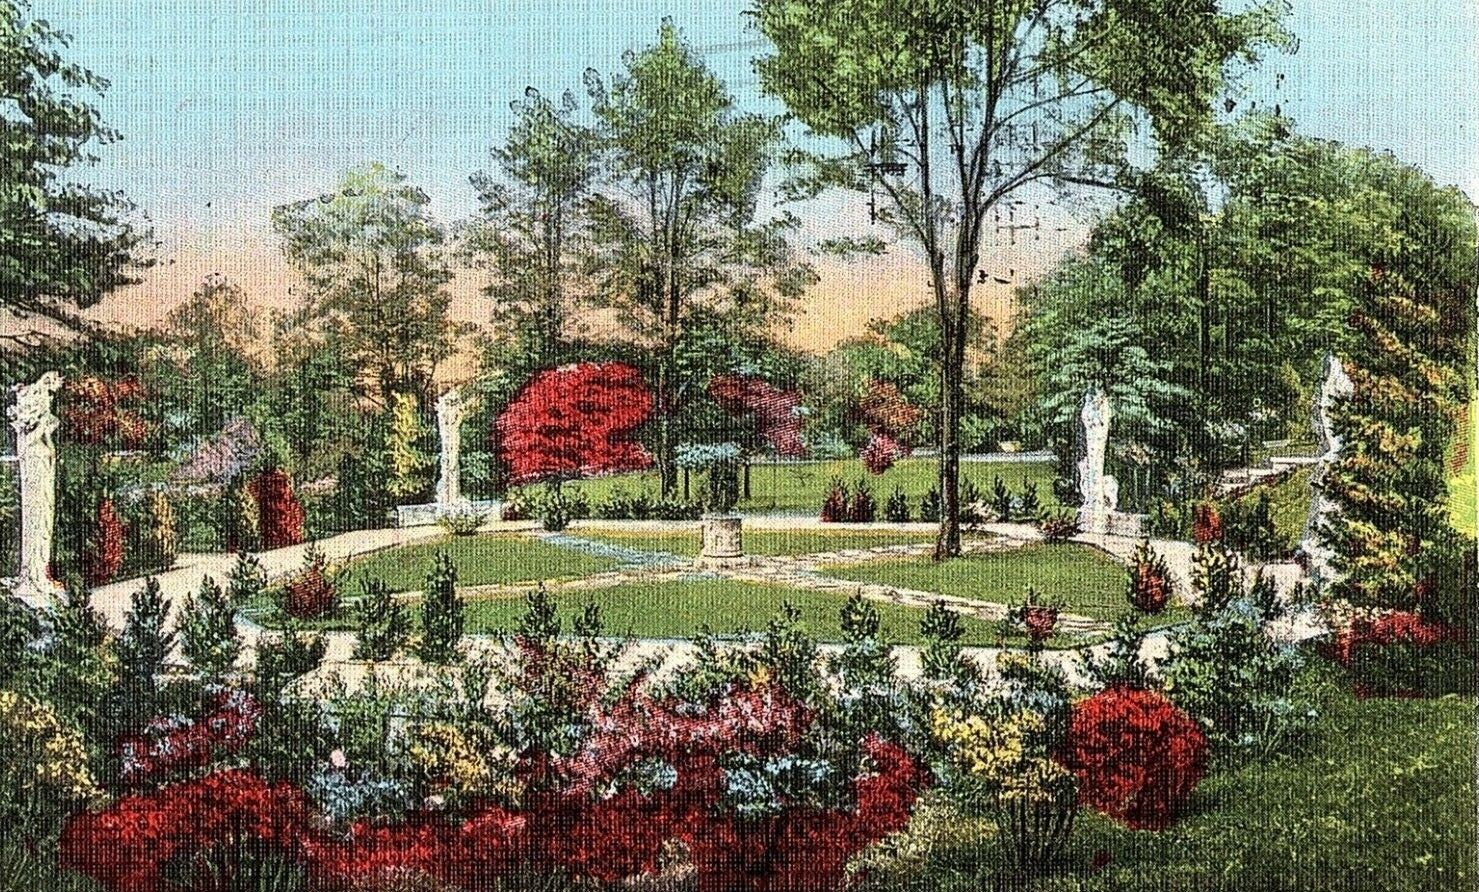 Vintage Italian Garden, Western State College Bowling Green, Ky Postcard P123